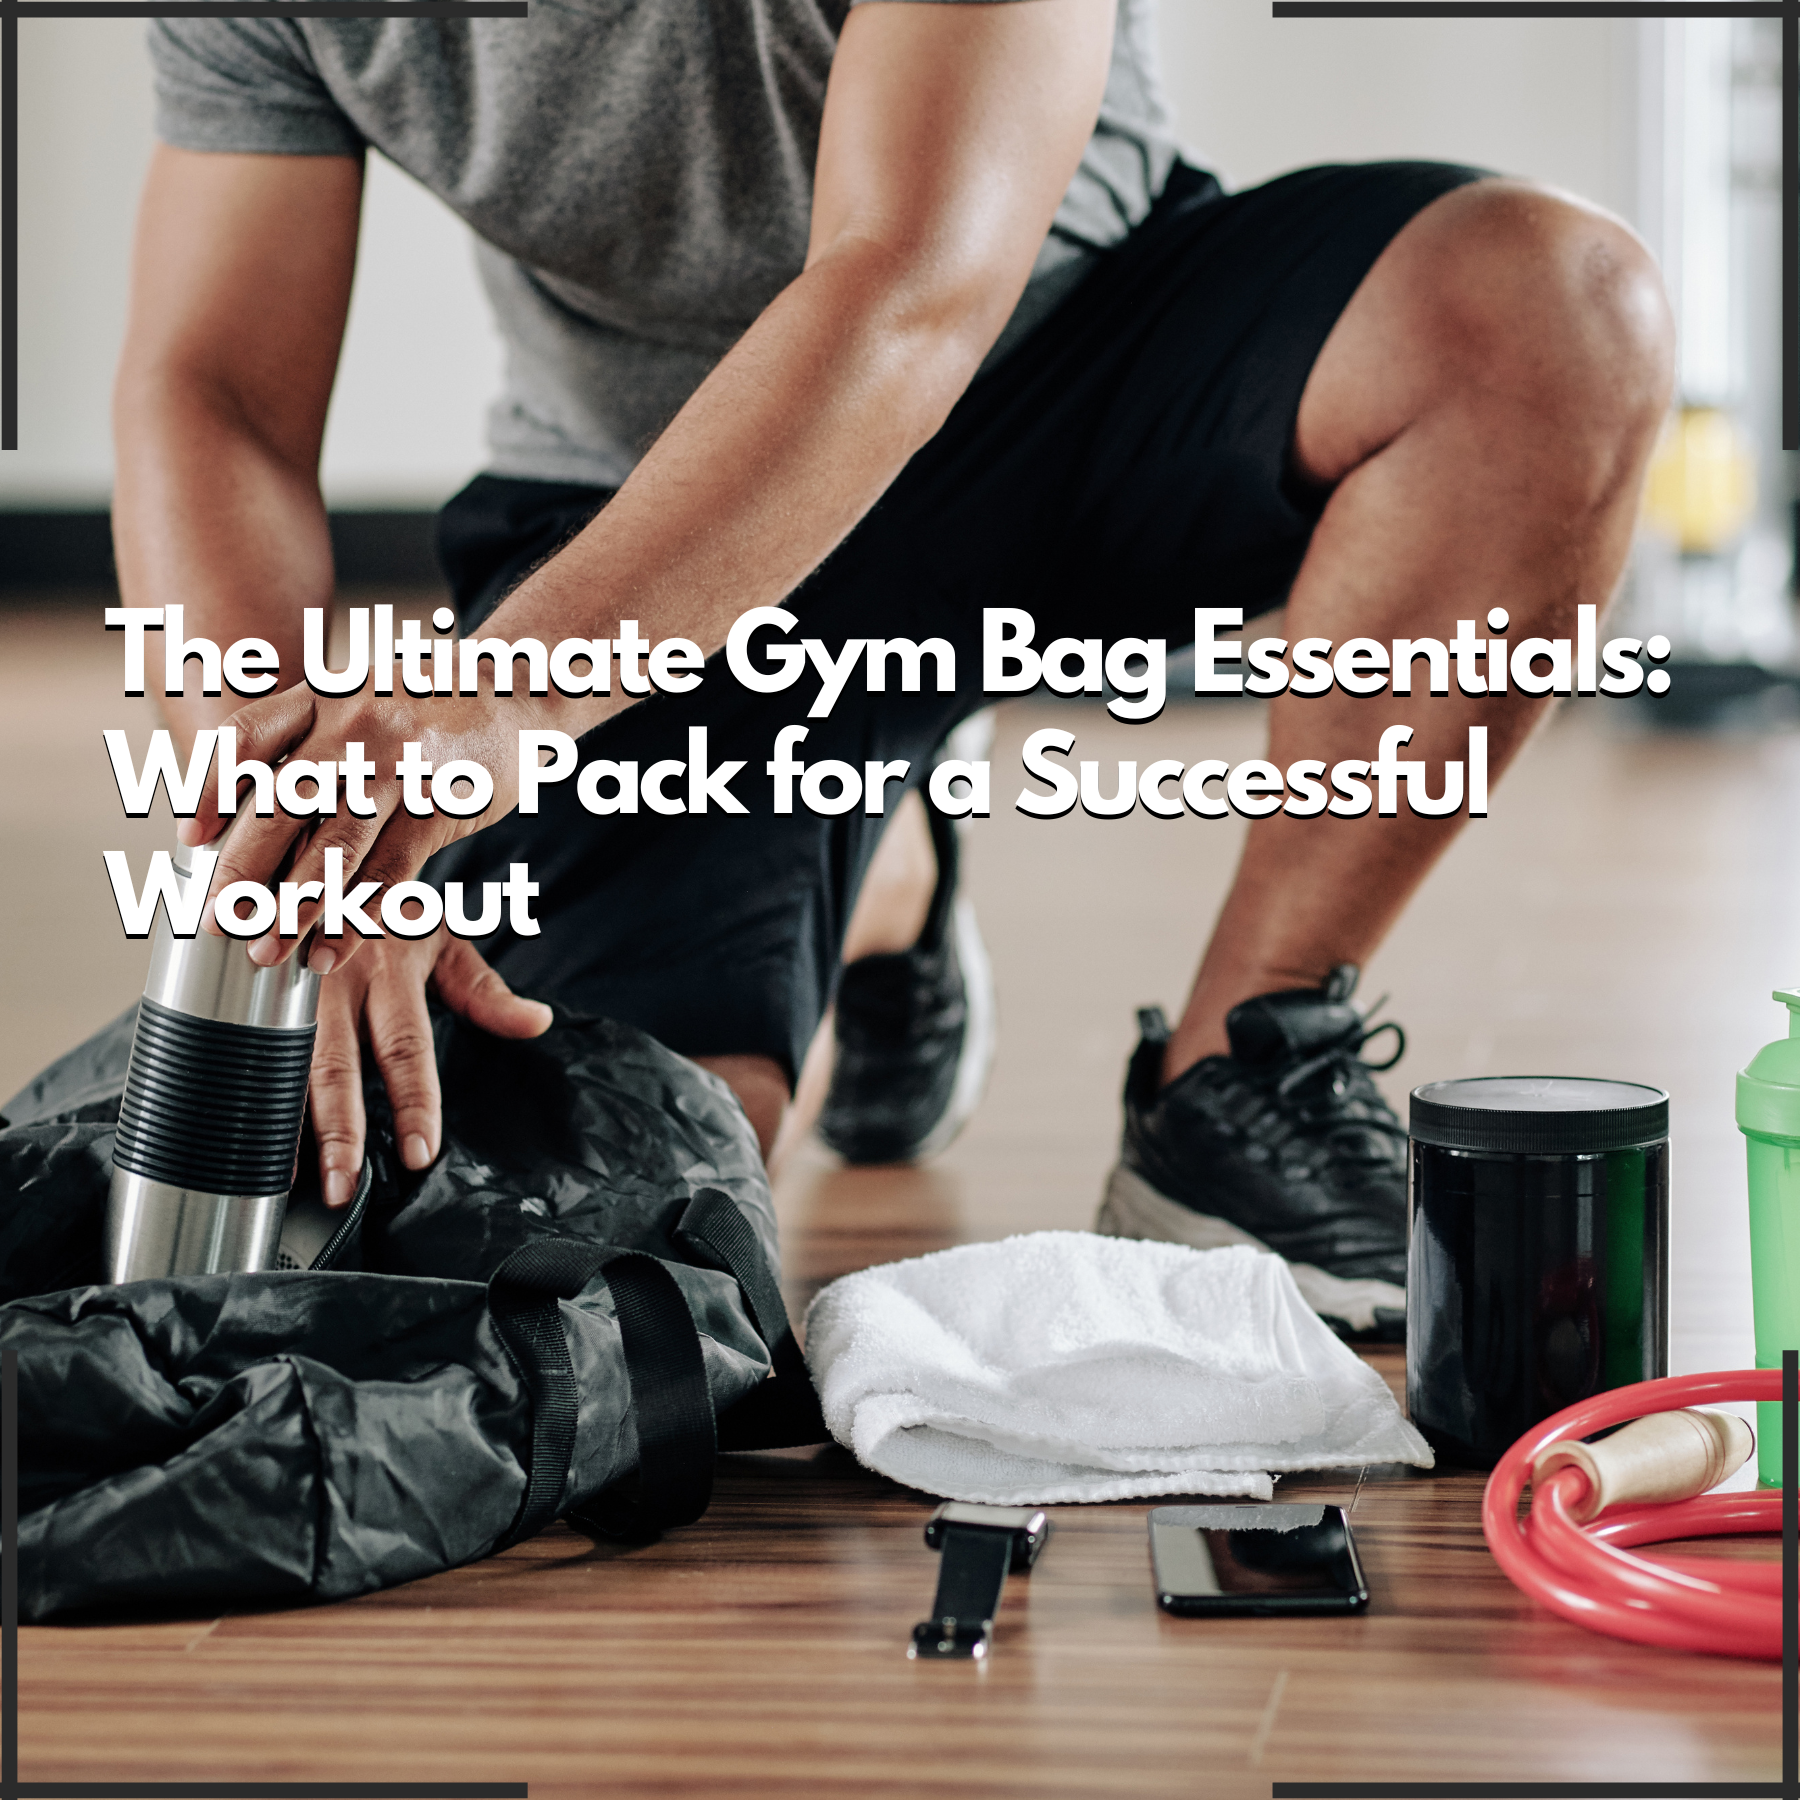 The Ultimate Gym Bag Essentials: What to Pack for a Successful Workout -  DURABODY SPORTS